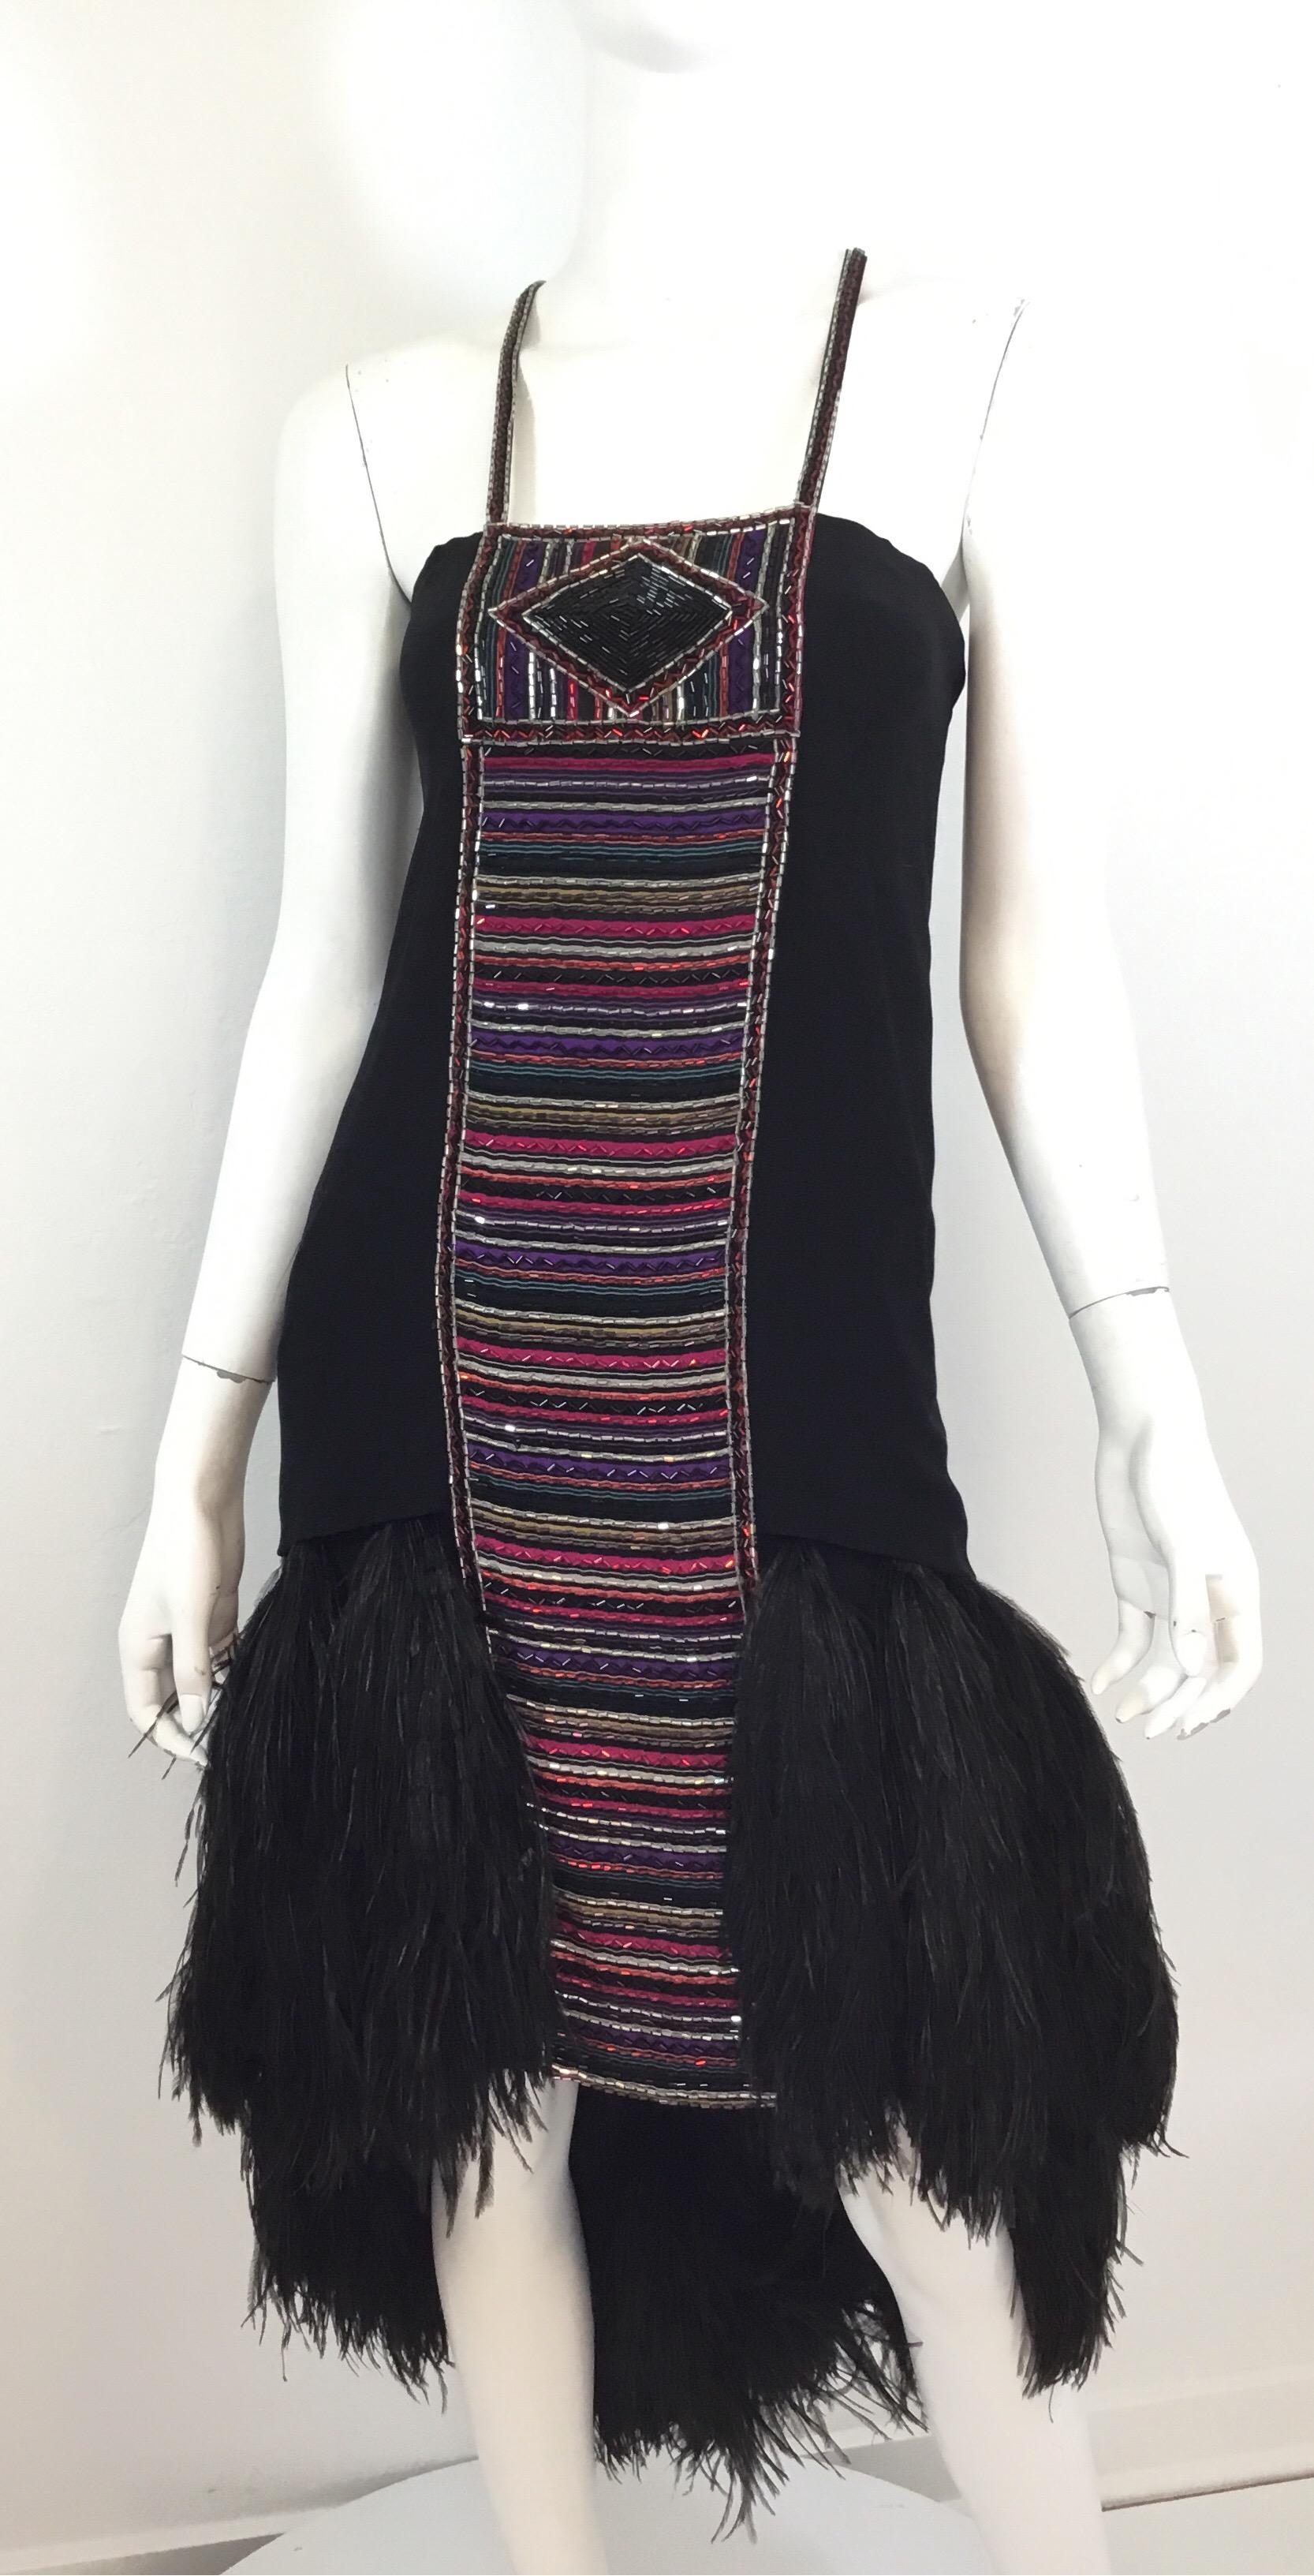 Bob Mackie embellished dress featured in black with multicolored bead detail throughout and a Ostrich Maribou feather hem. Dress is fully lined and has a back zipper fastening along with a hook and eye closure for the shoulder straps. Excellent